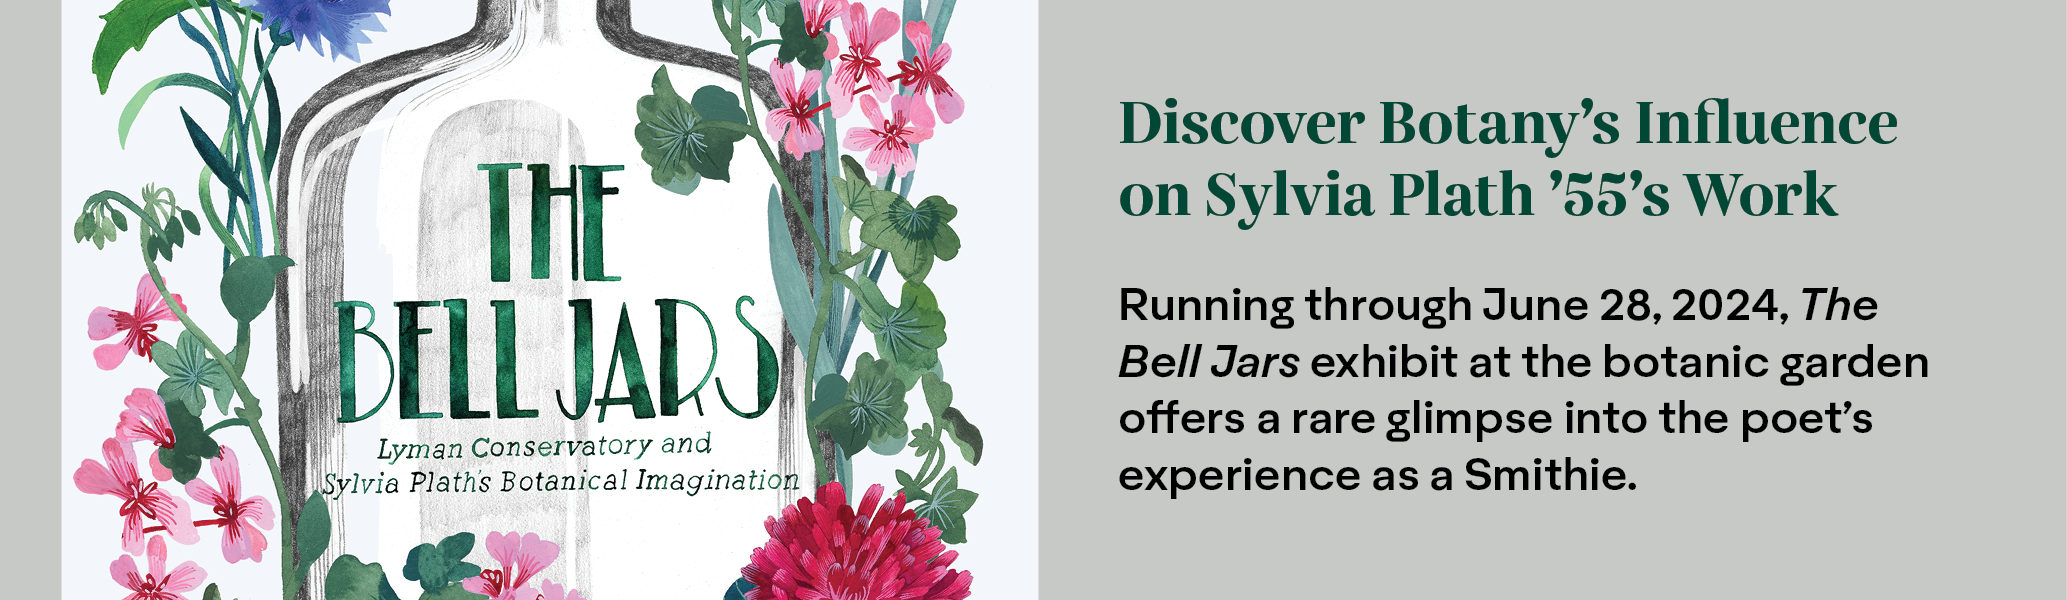 A promotional graphic in support of Smith College's 2024 Sylvia Plath exhibit at its Northampton botanic garden.